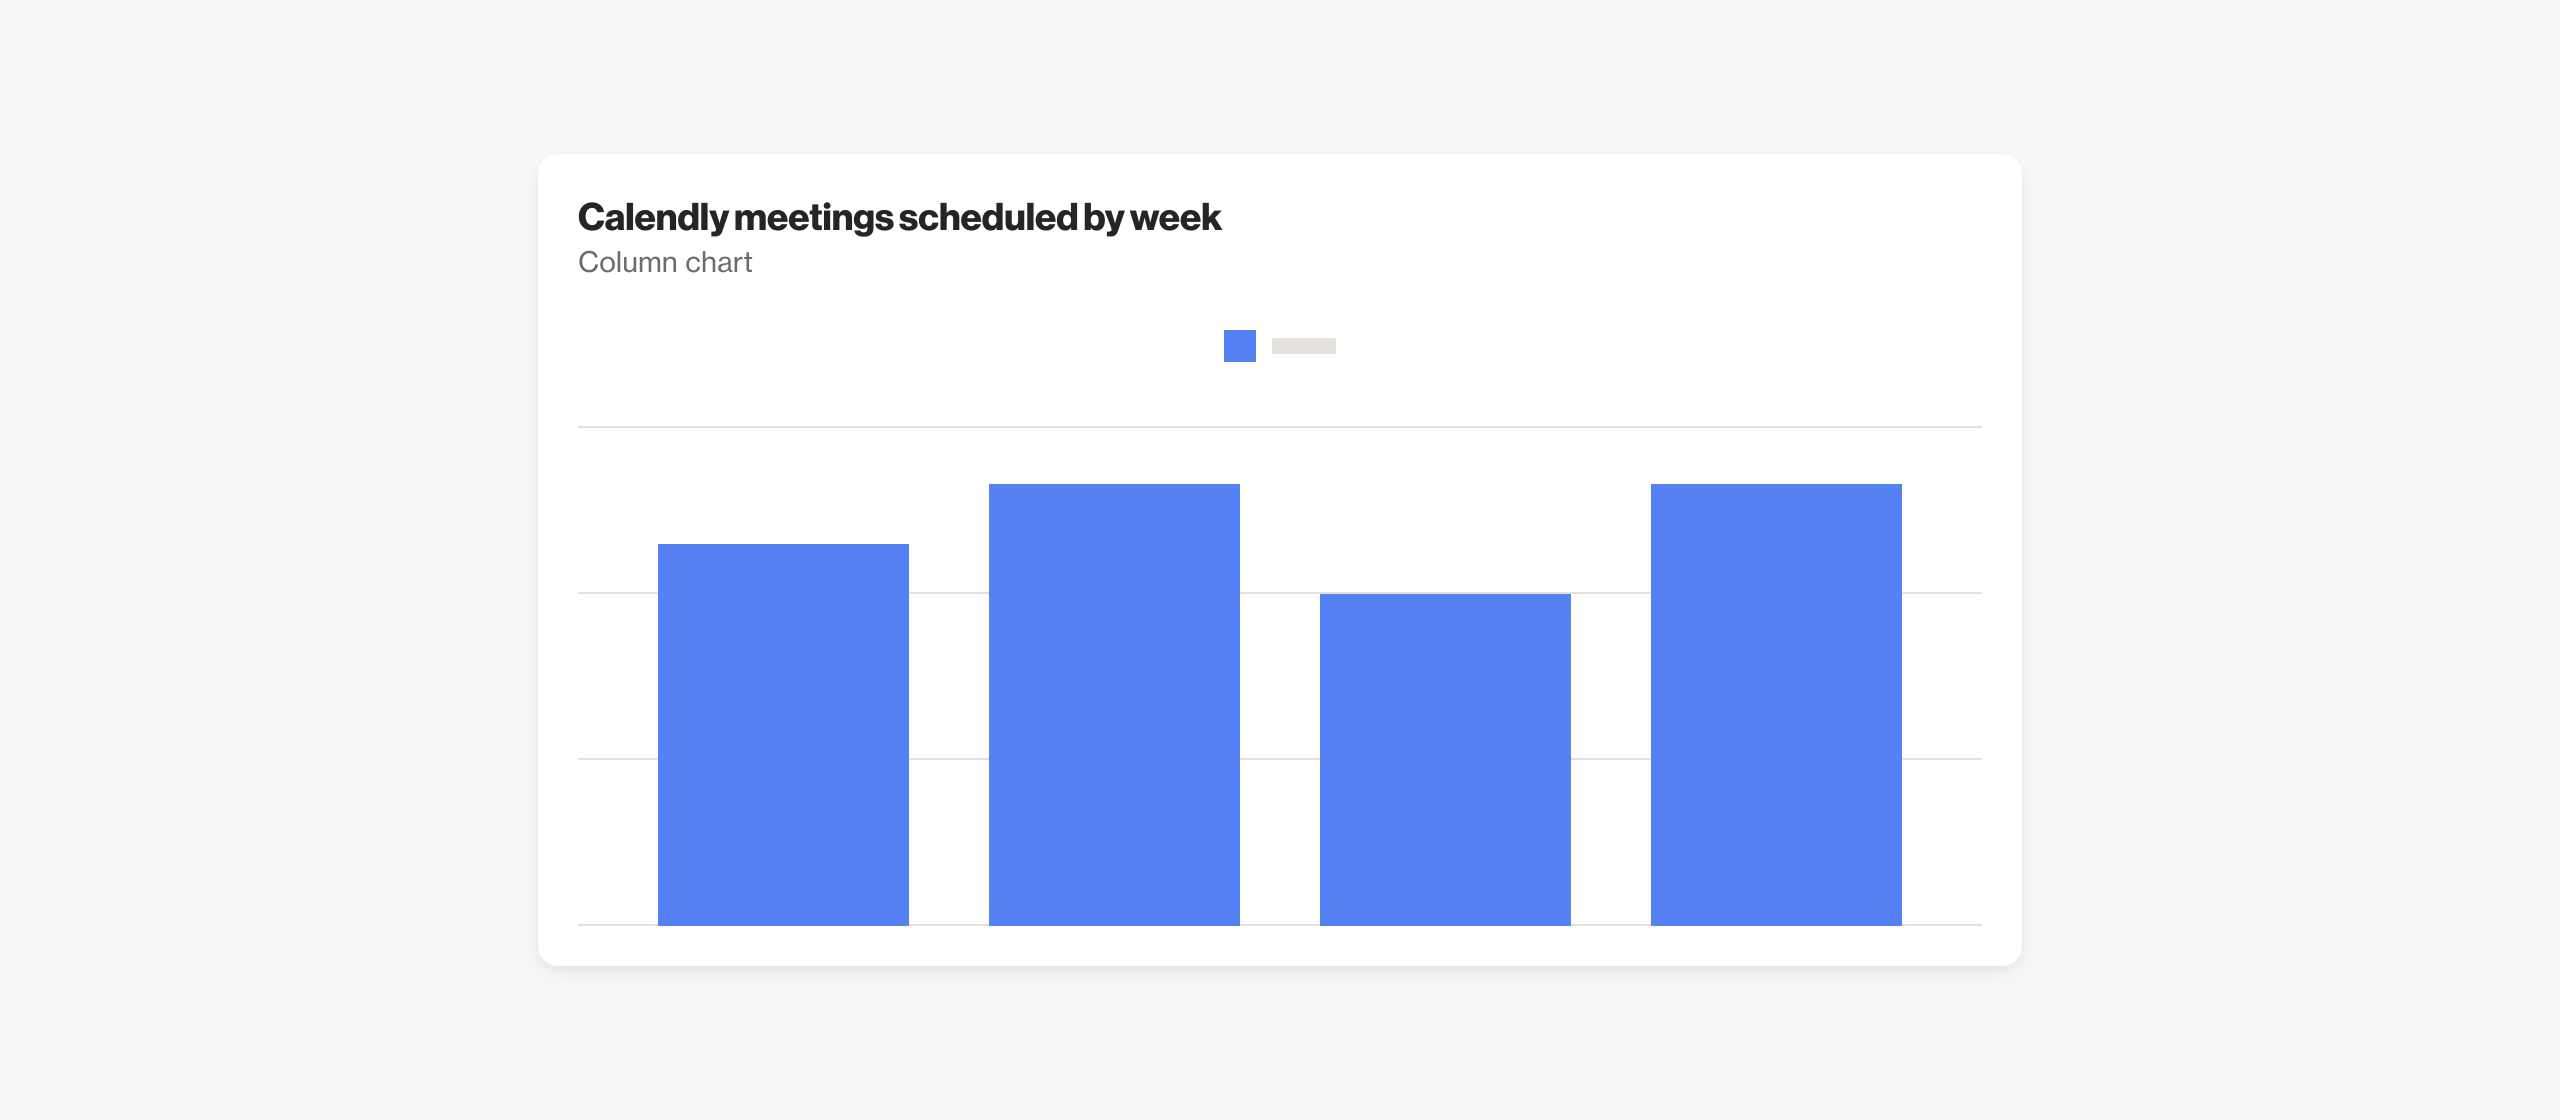 Calendly meeting scheduled by week